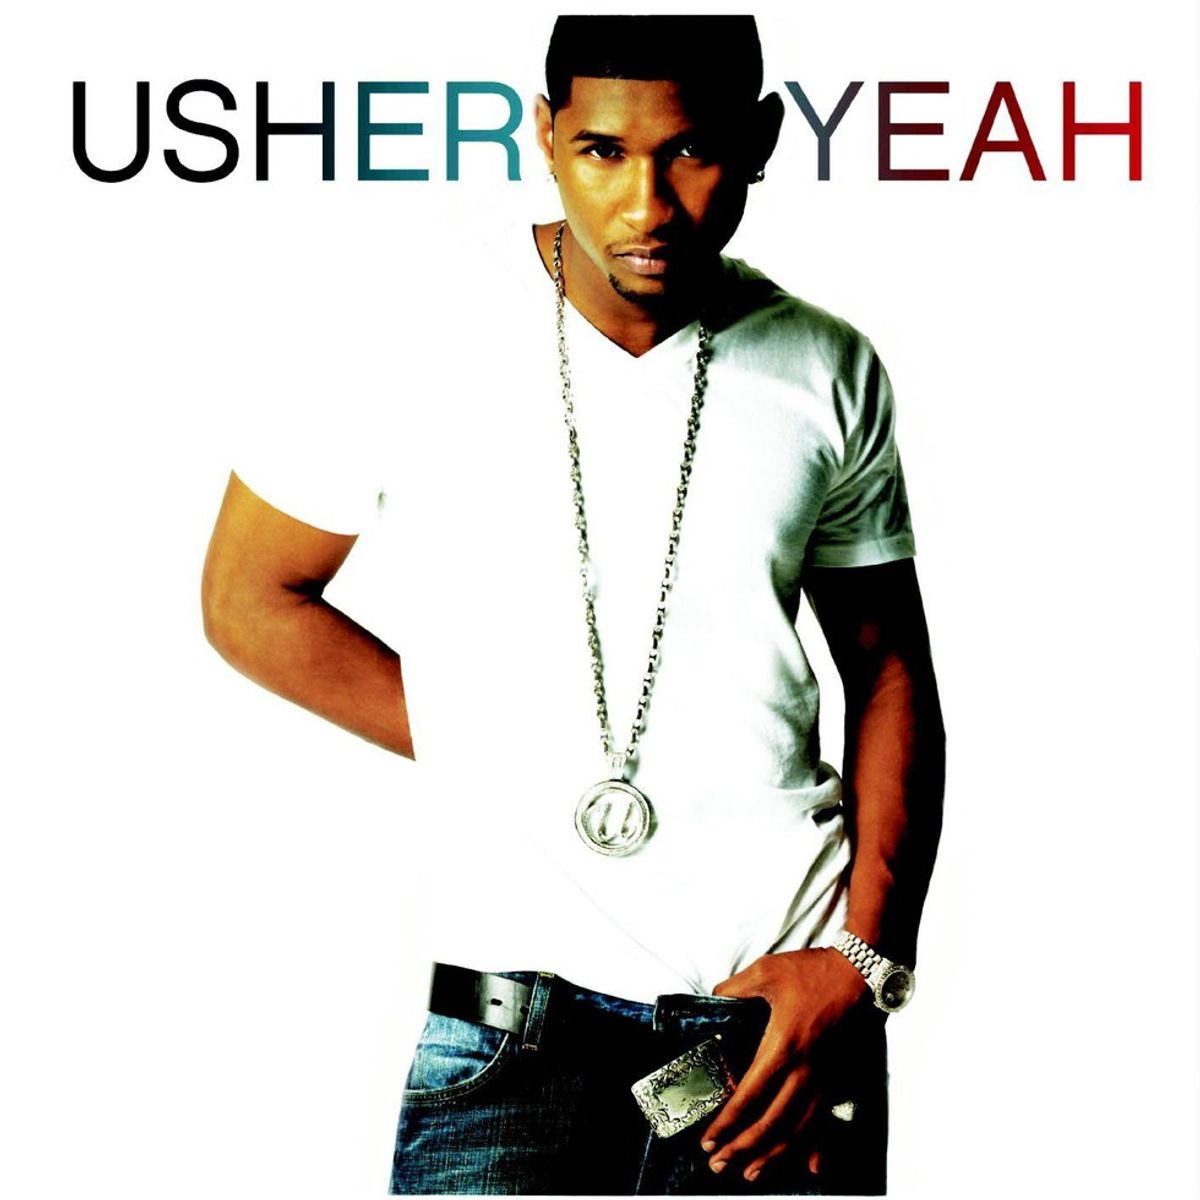 A Deeper Look into the Song "Yeah!" by Usher